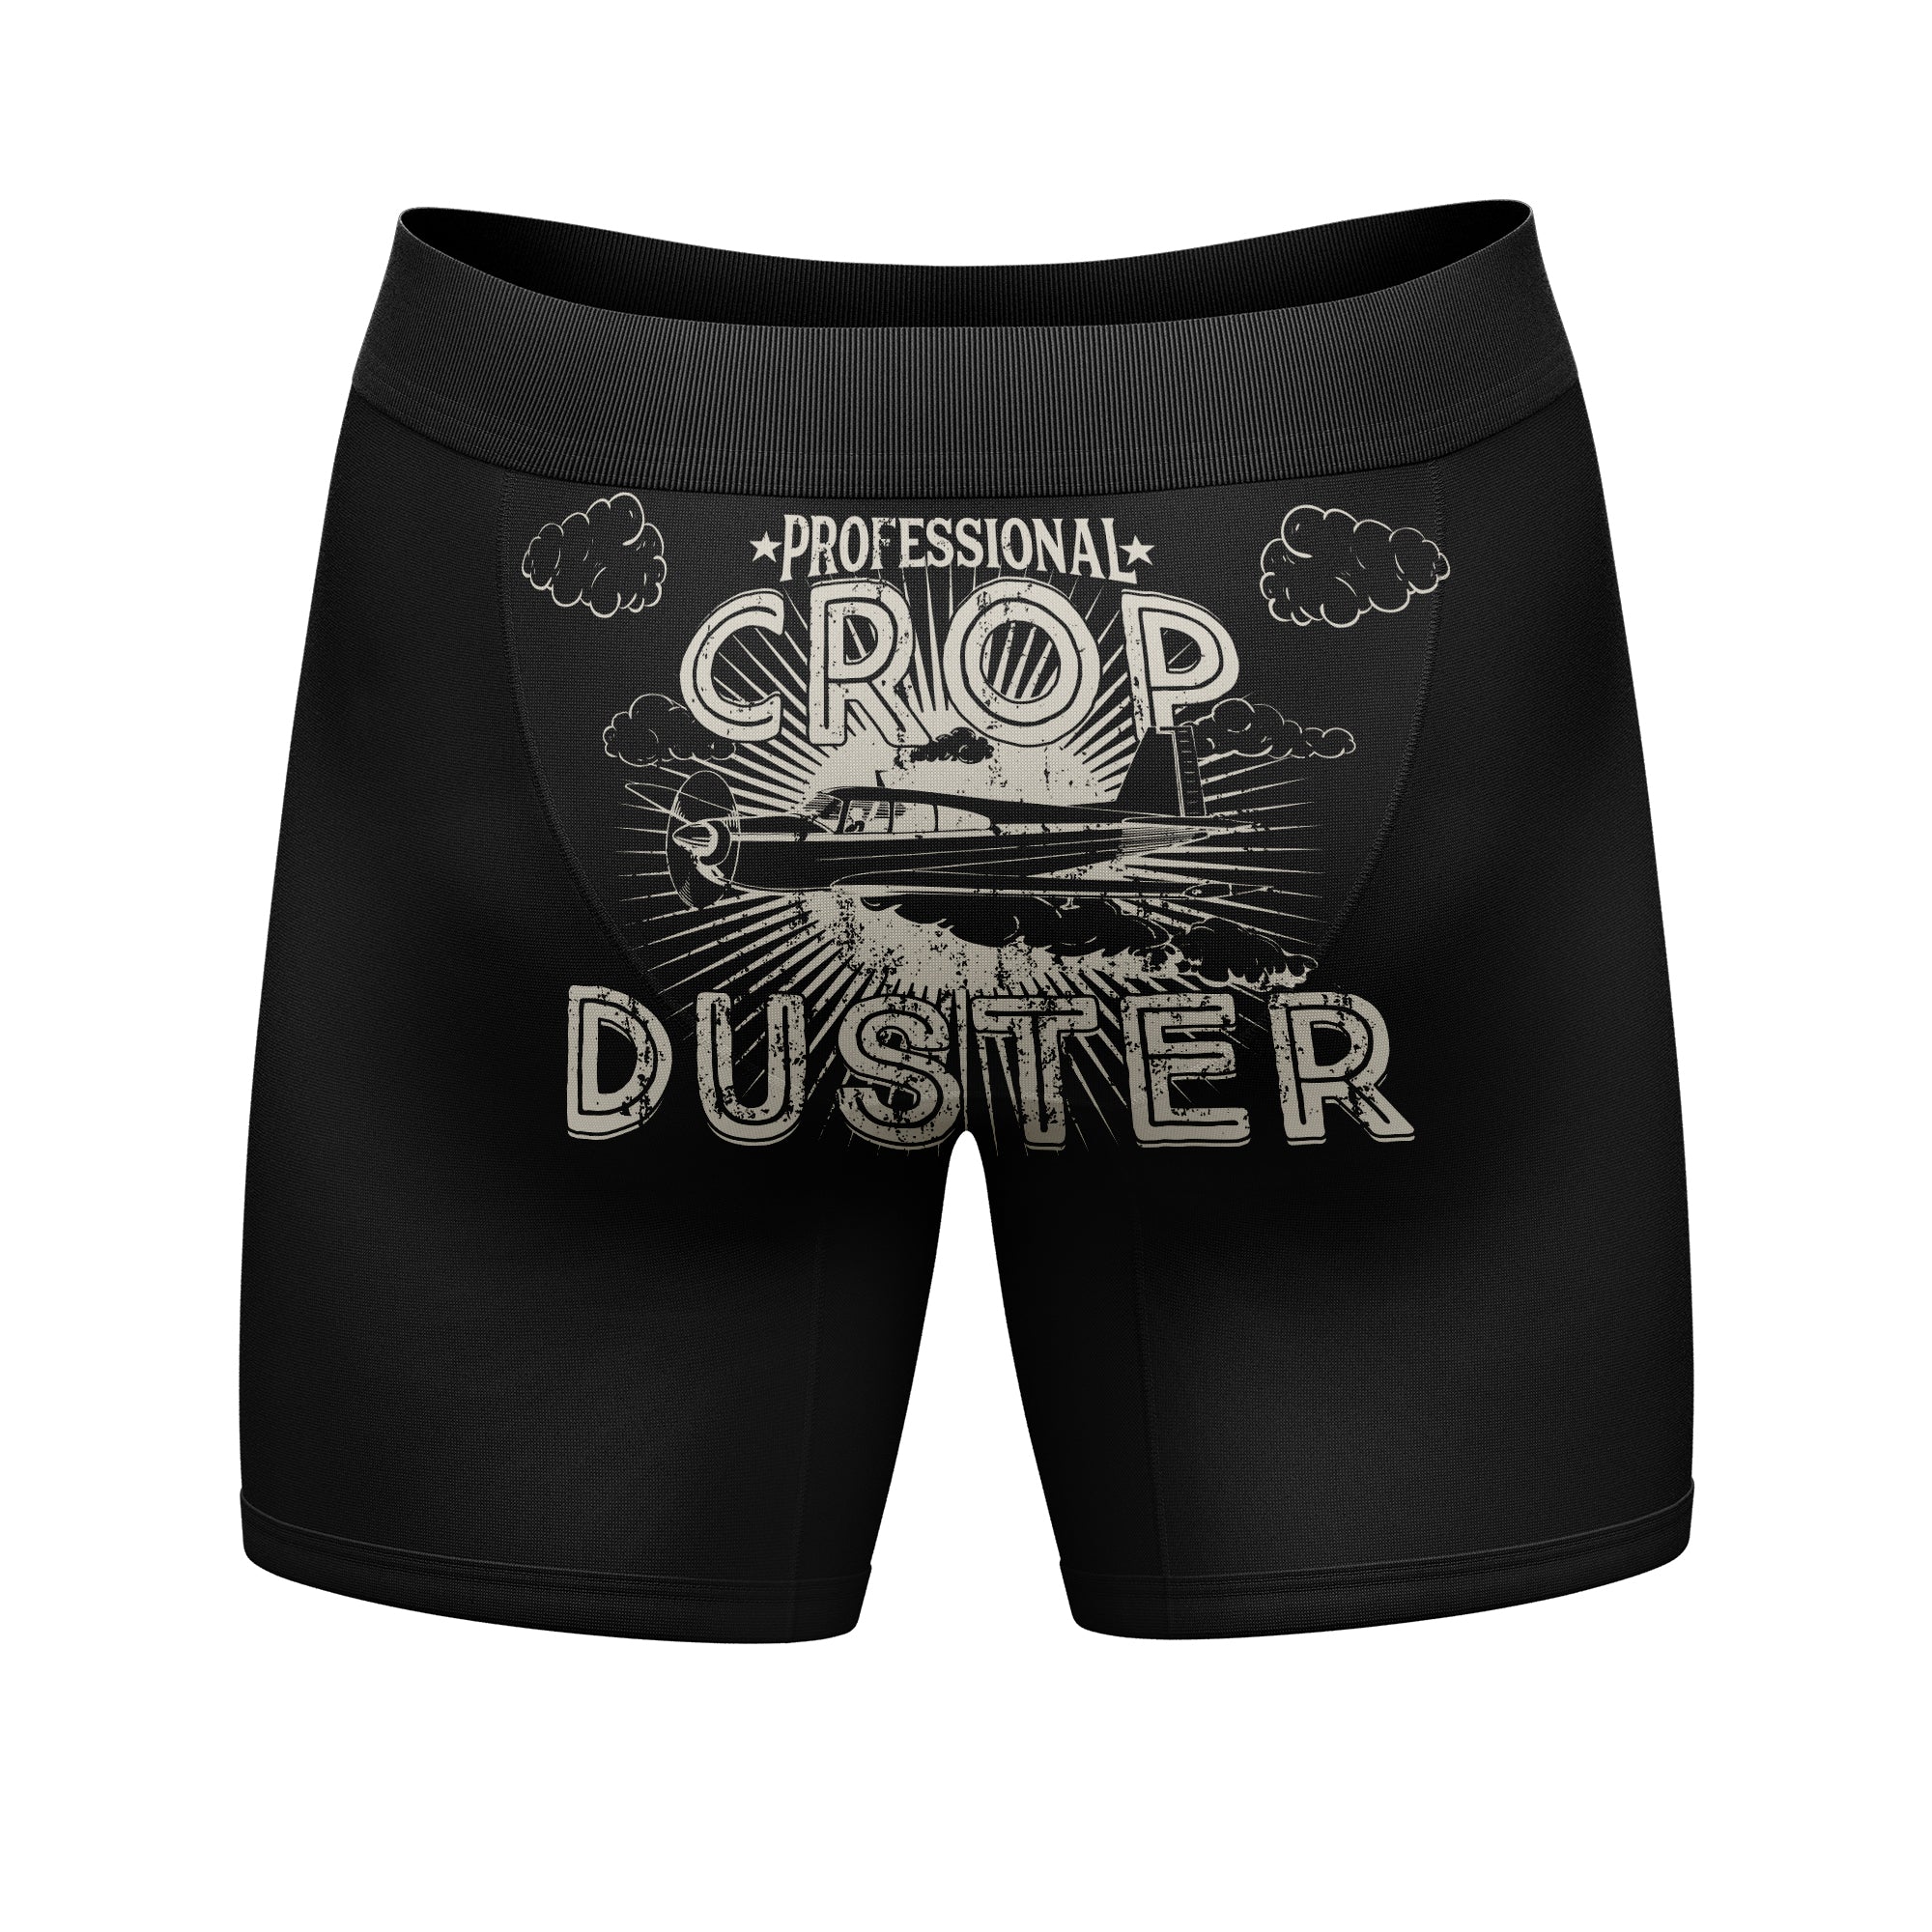 Funny Black Professional Crop Duster Nerdy Toilet Tee